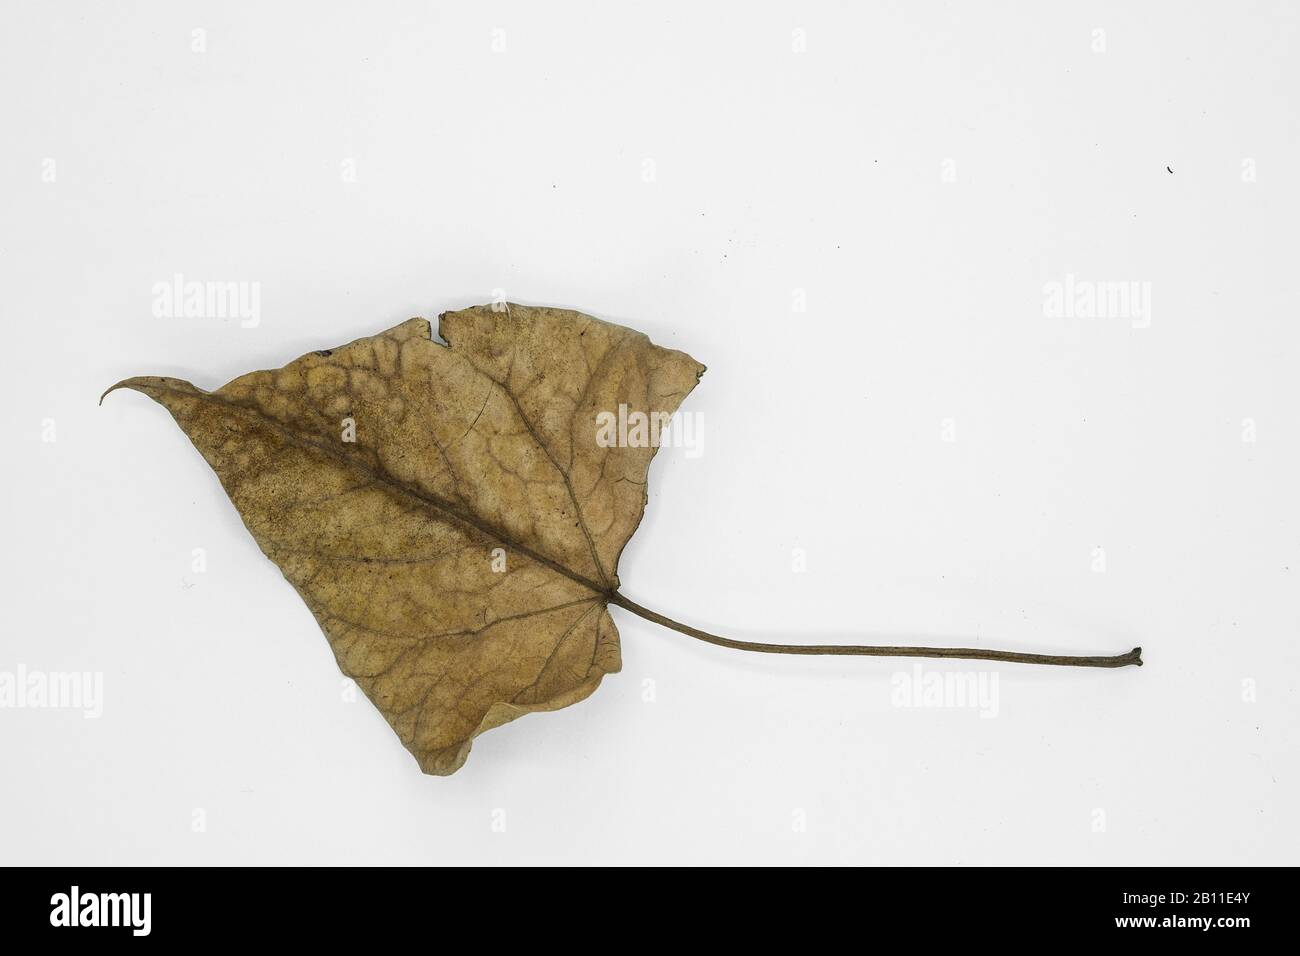 Portia dry leaf , leaves fall in March and April months in India Stock Photo